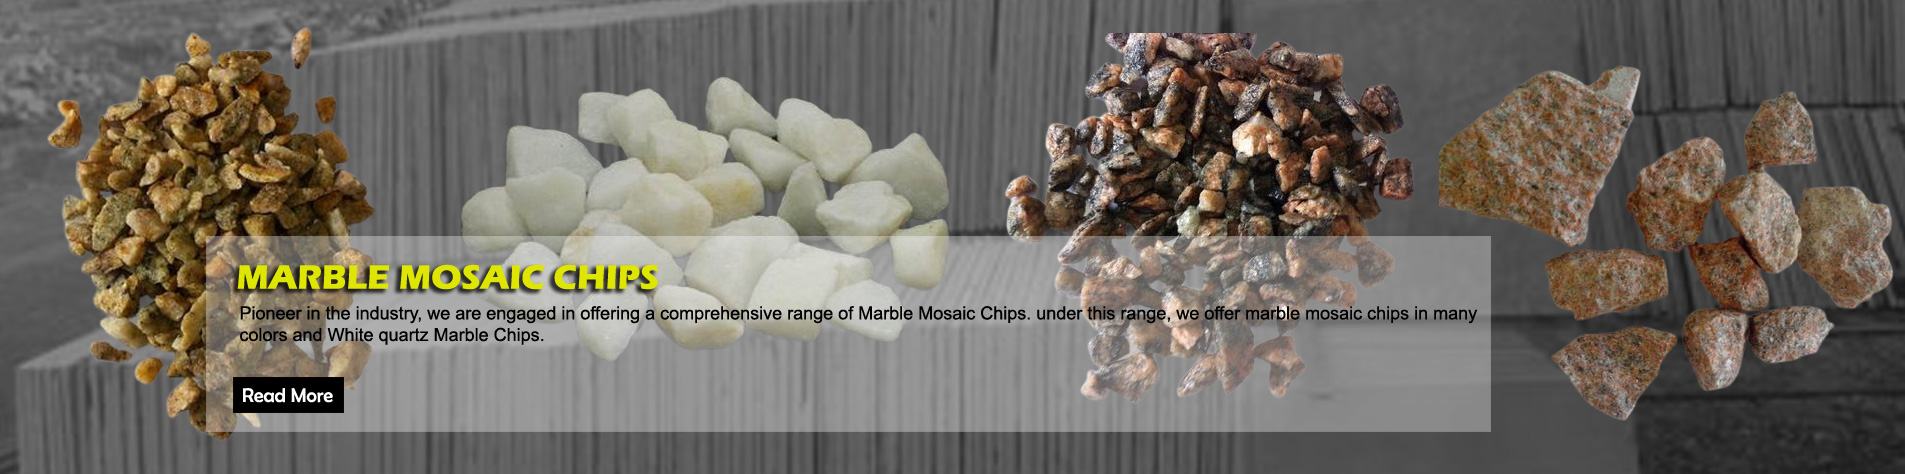 MARBLE MOSAIC CHIPS